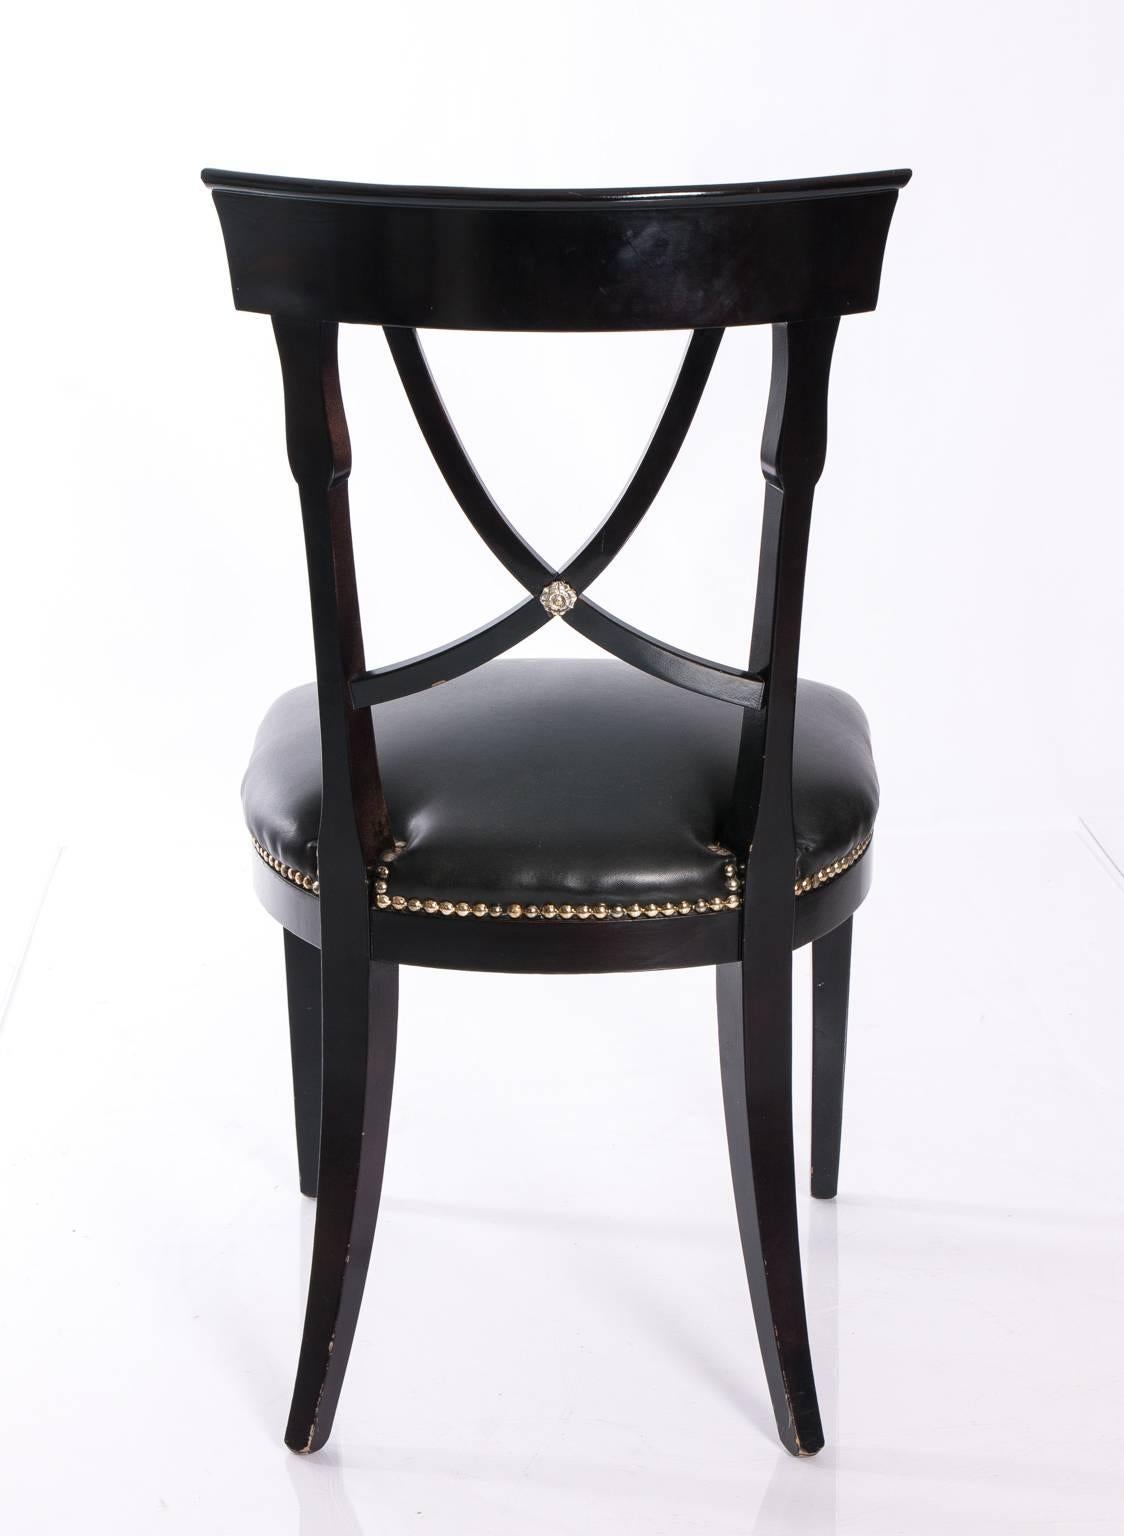 Regency style chair with ebonized wood and leather seat, and gold nailheads. Great as a desk chair or side chair.